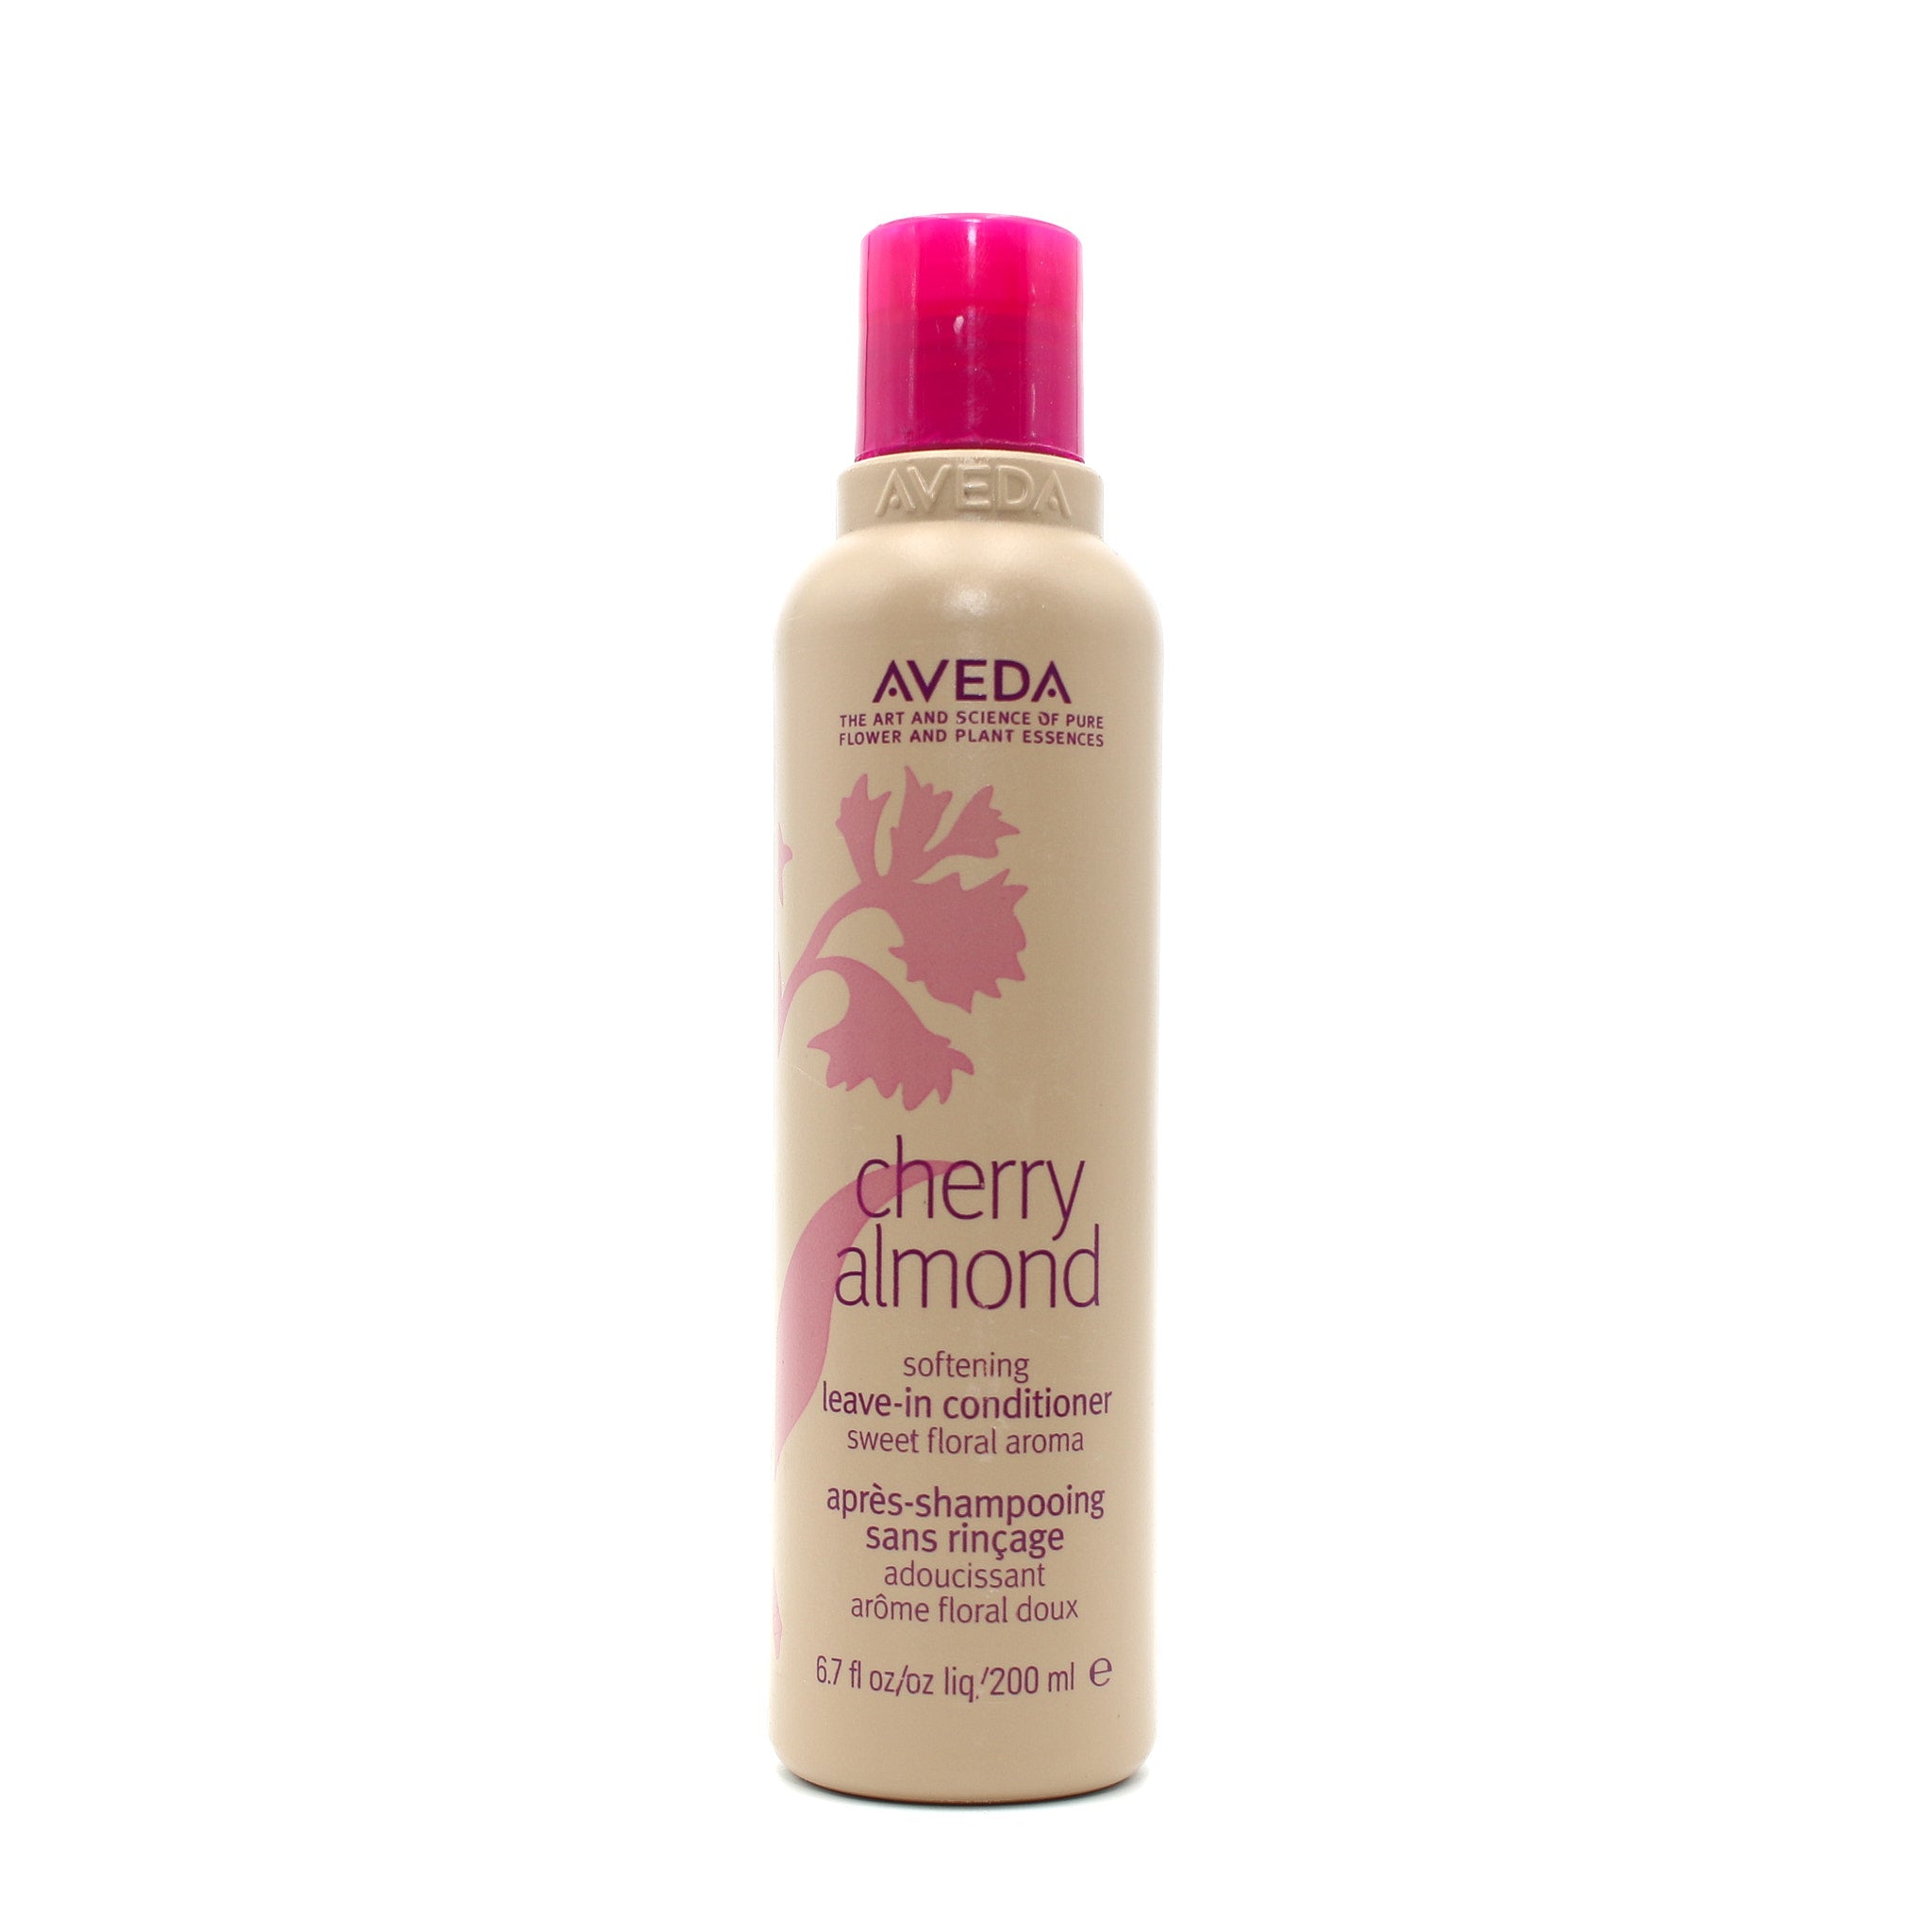 Aveda Cherry Almond Softening Leave in Conditioner 6.7 oz